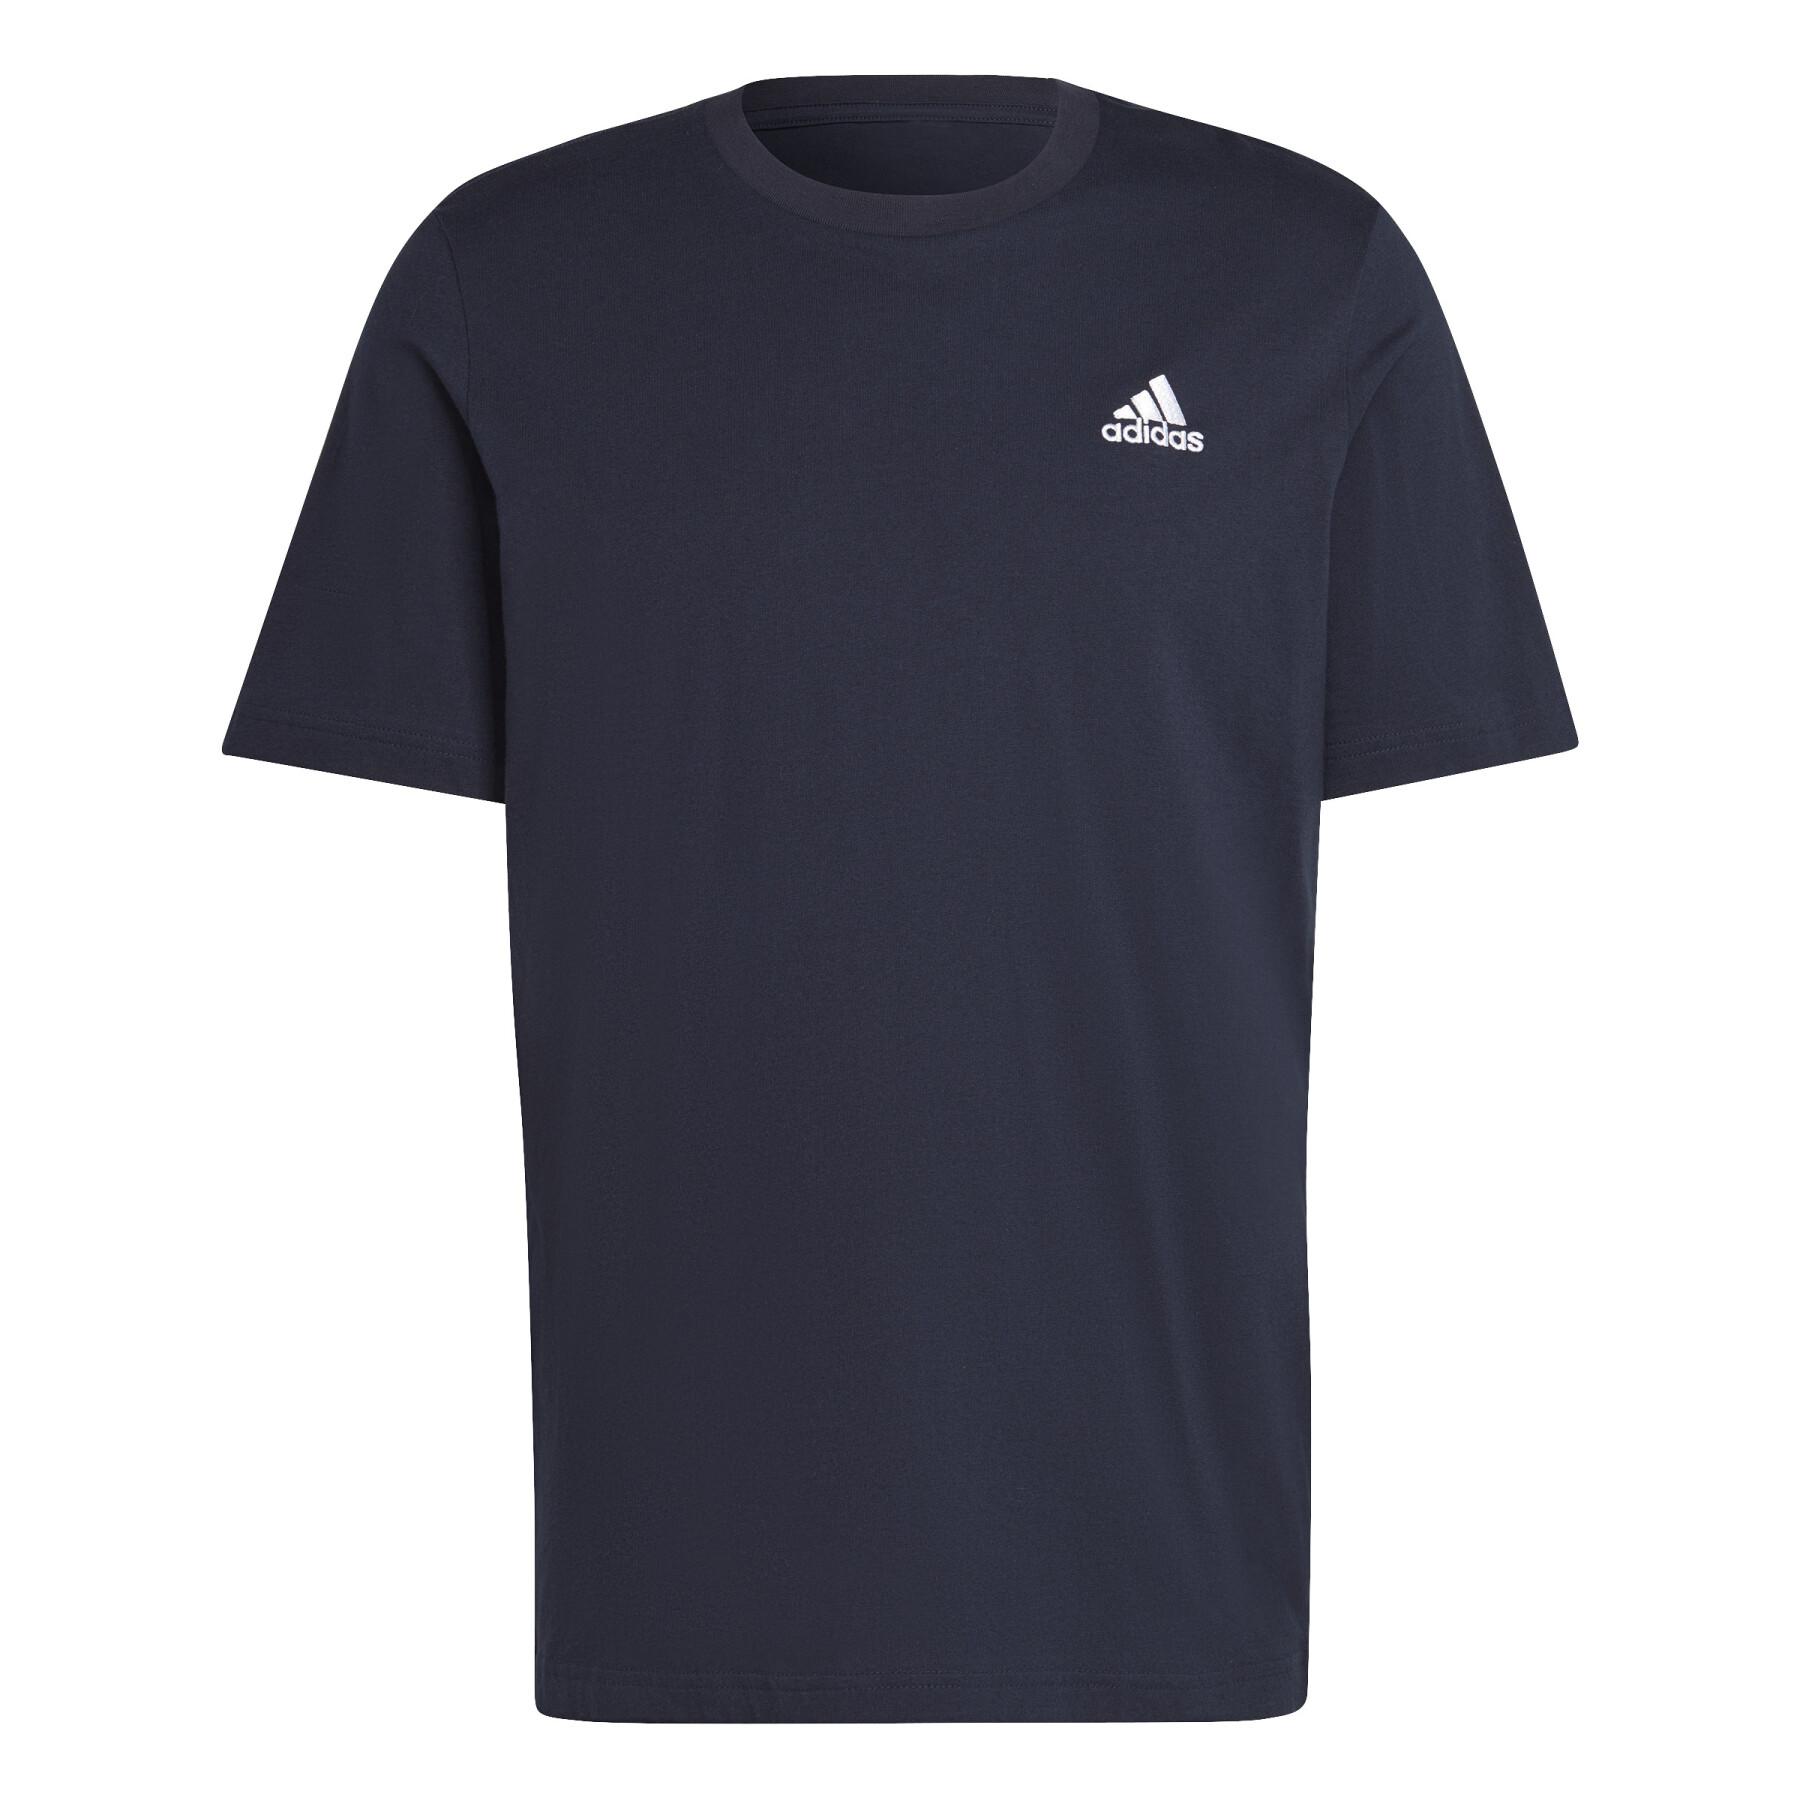 Simple embroidered small logo jersey adidas Essentials